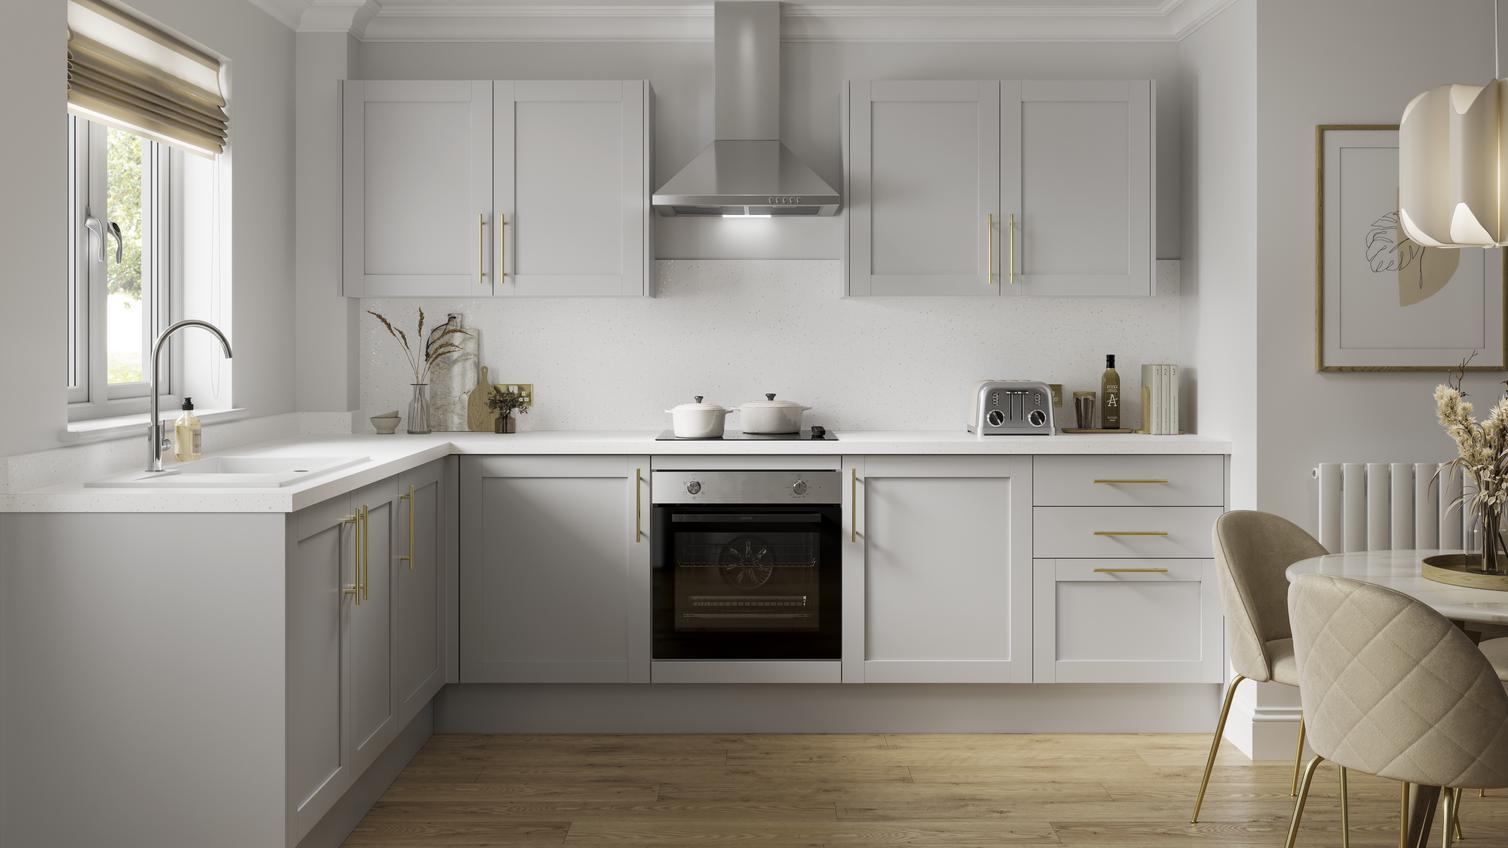 A grey shaker kitchen design with luxury features including a white worktop and backboard, white sink, and brass handles.